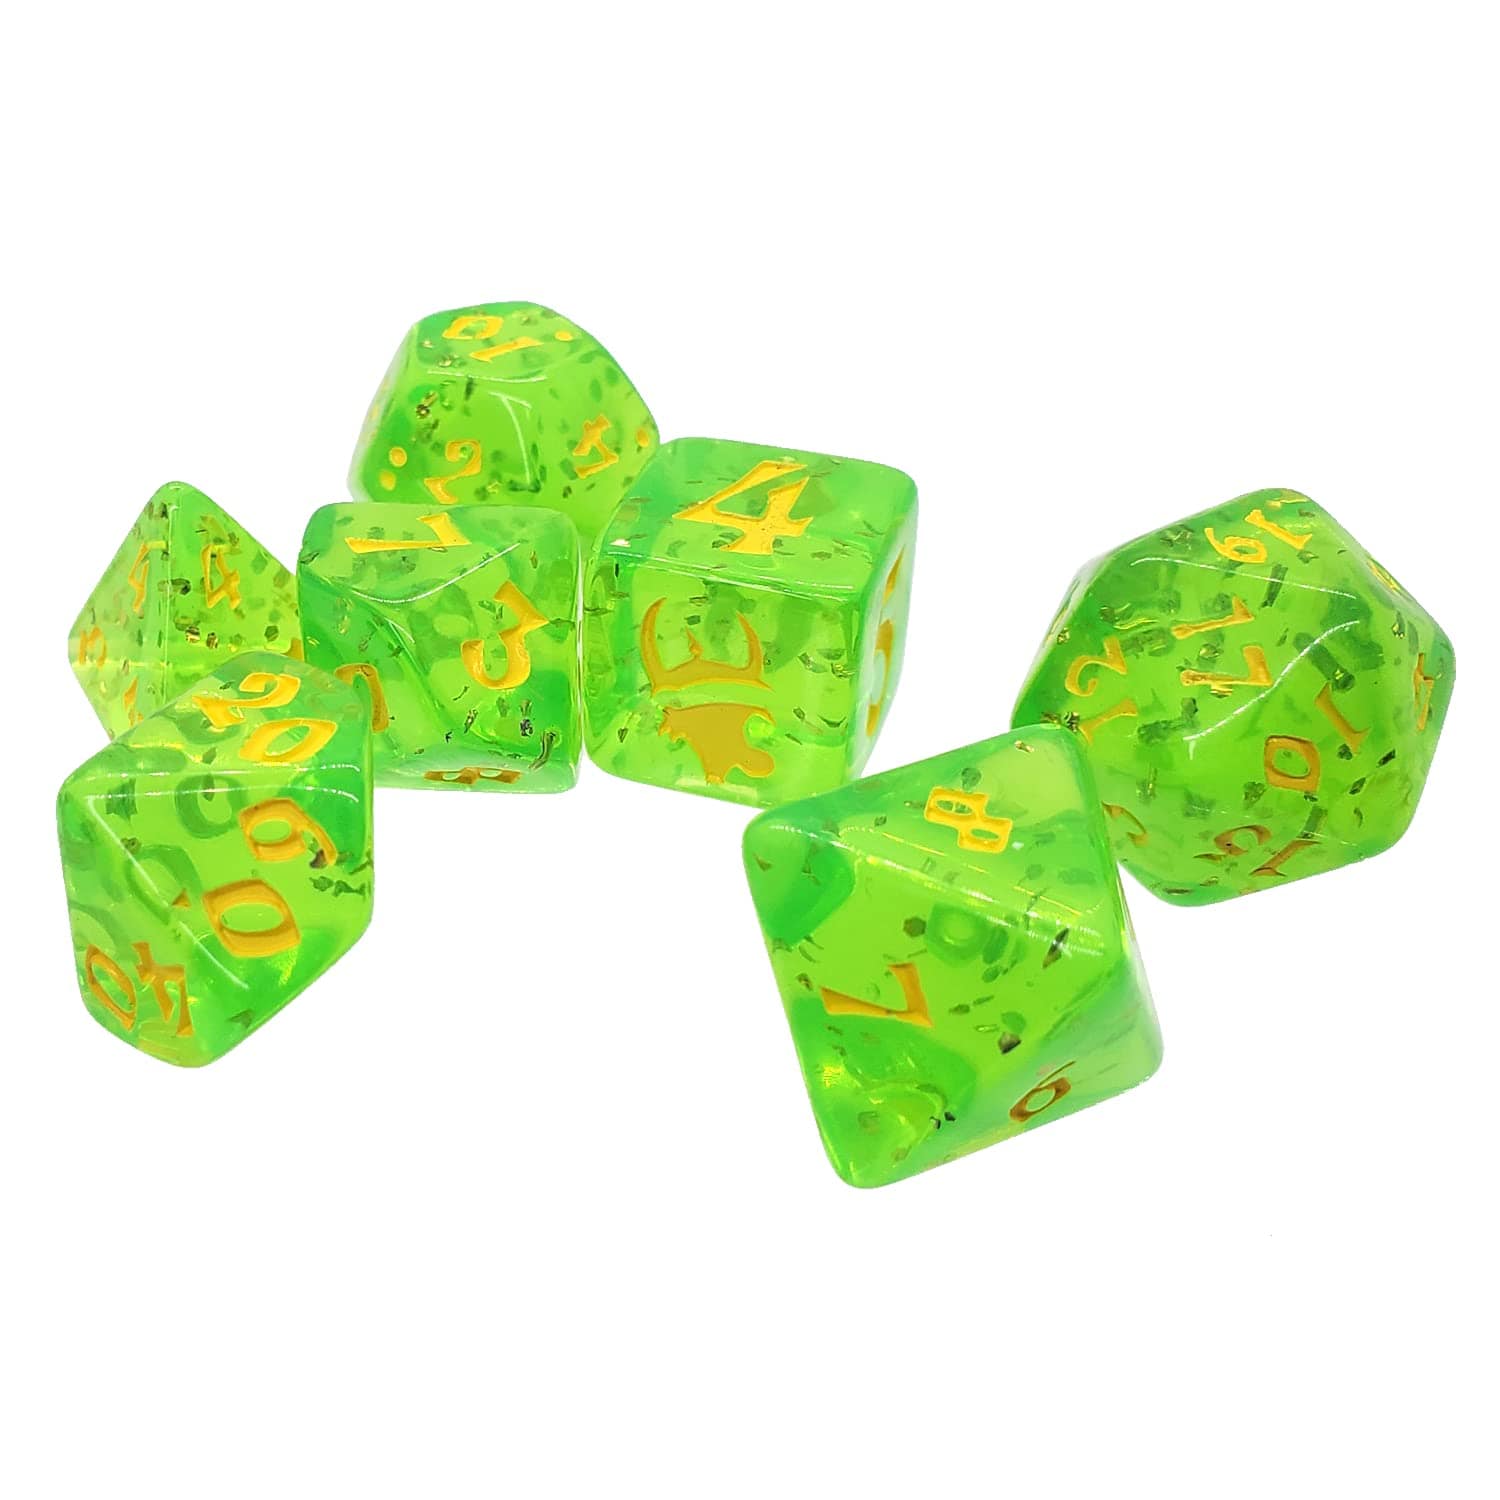 Steve Jackson Games Polyhedral Dice Set (7): Munchkin - Green/Yellow - Lost City Toys